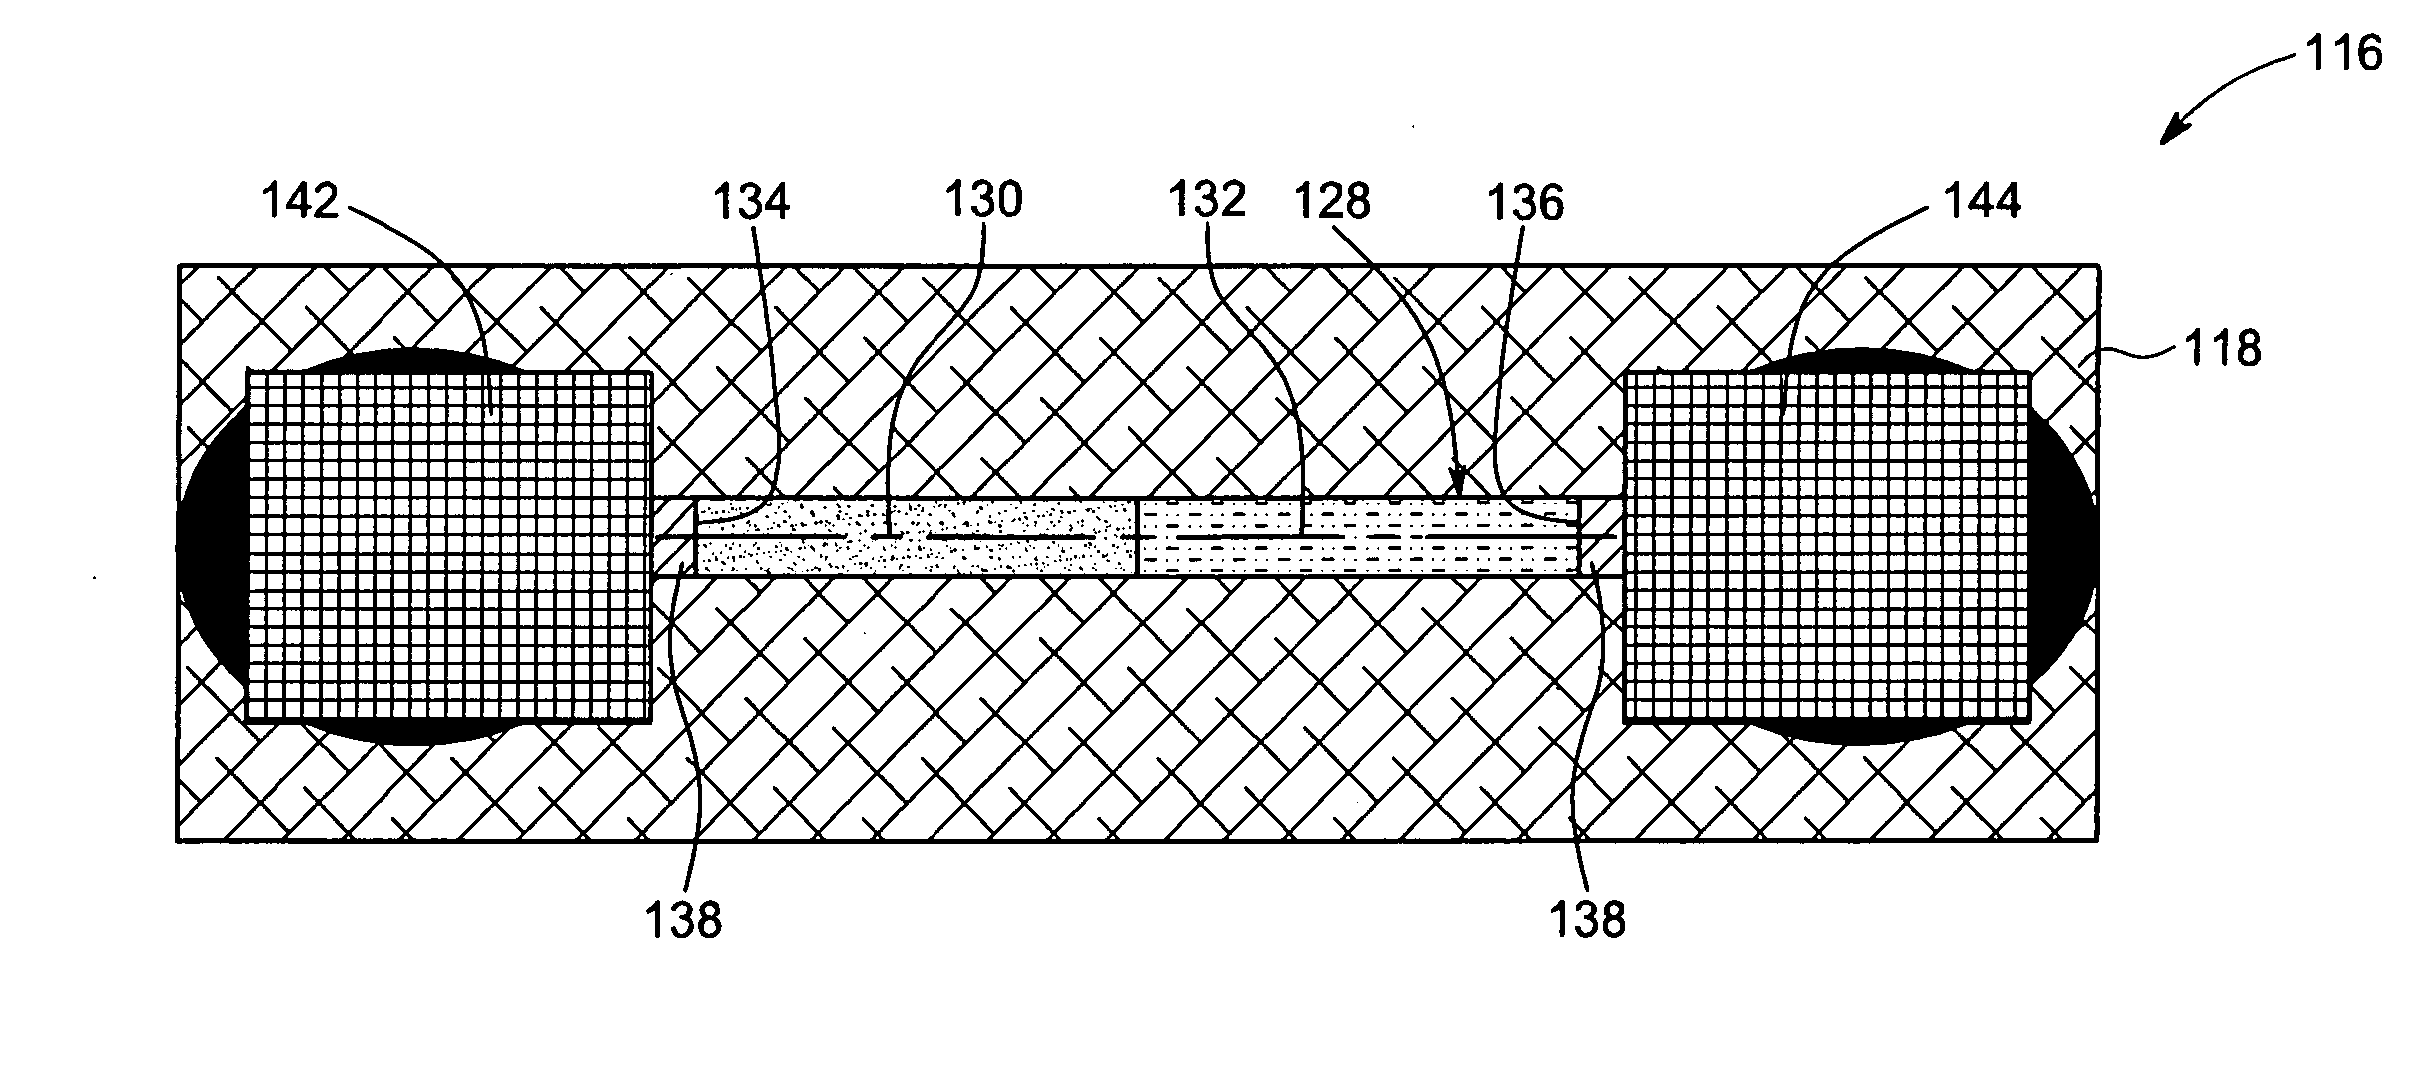 Nanowire structures and devices for use in large-area electronics and methods of making the same